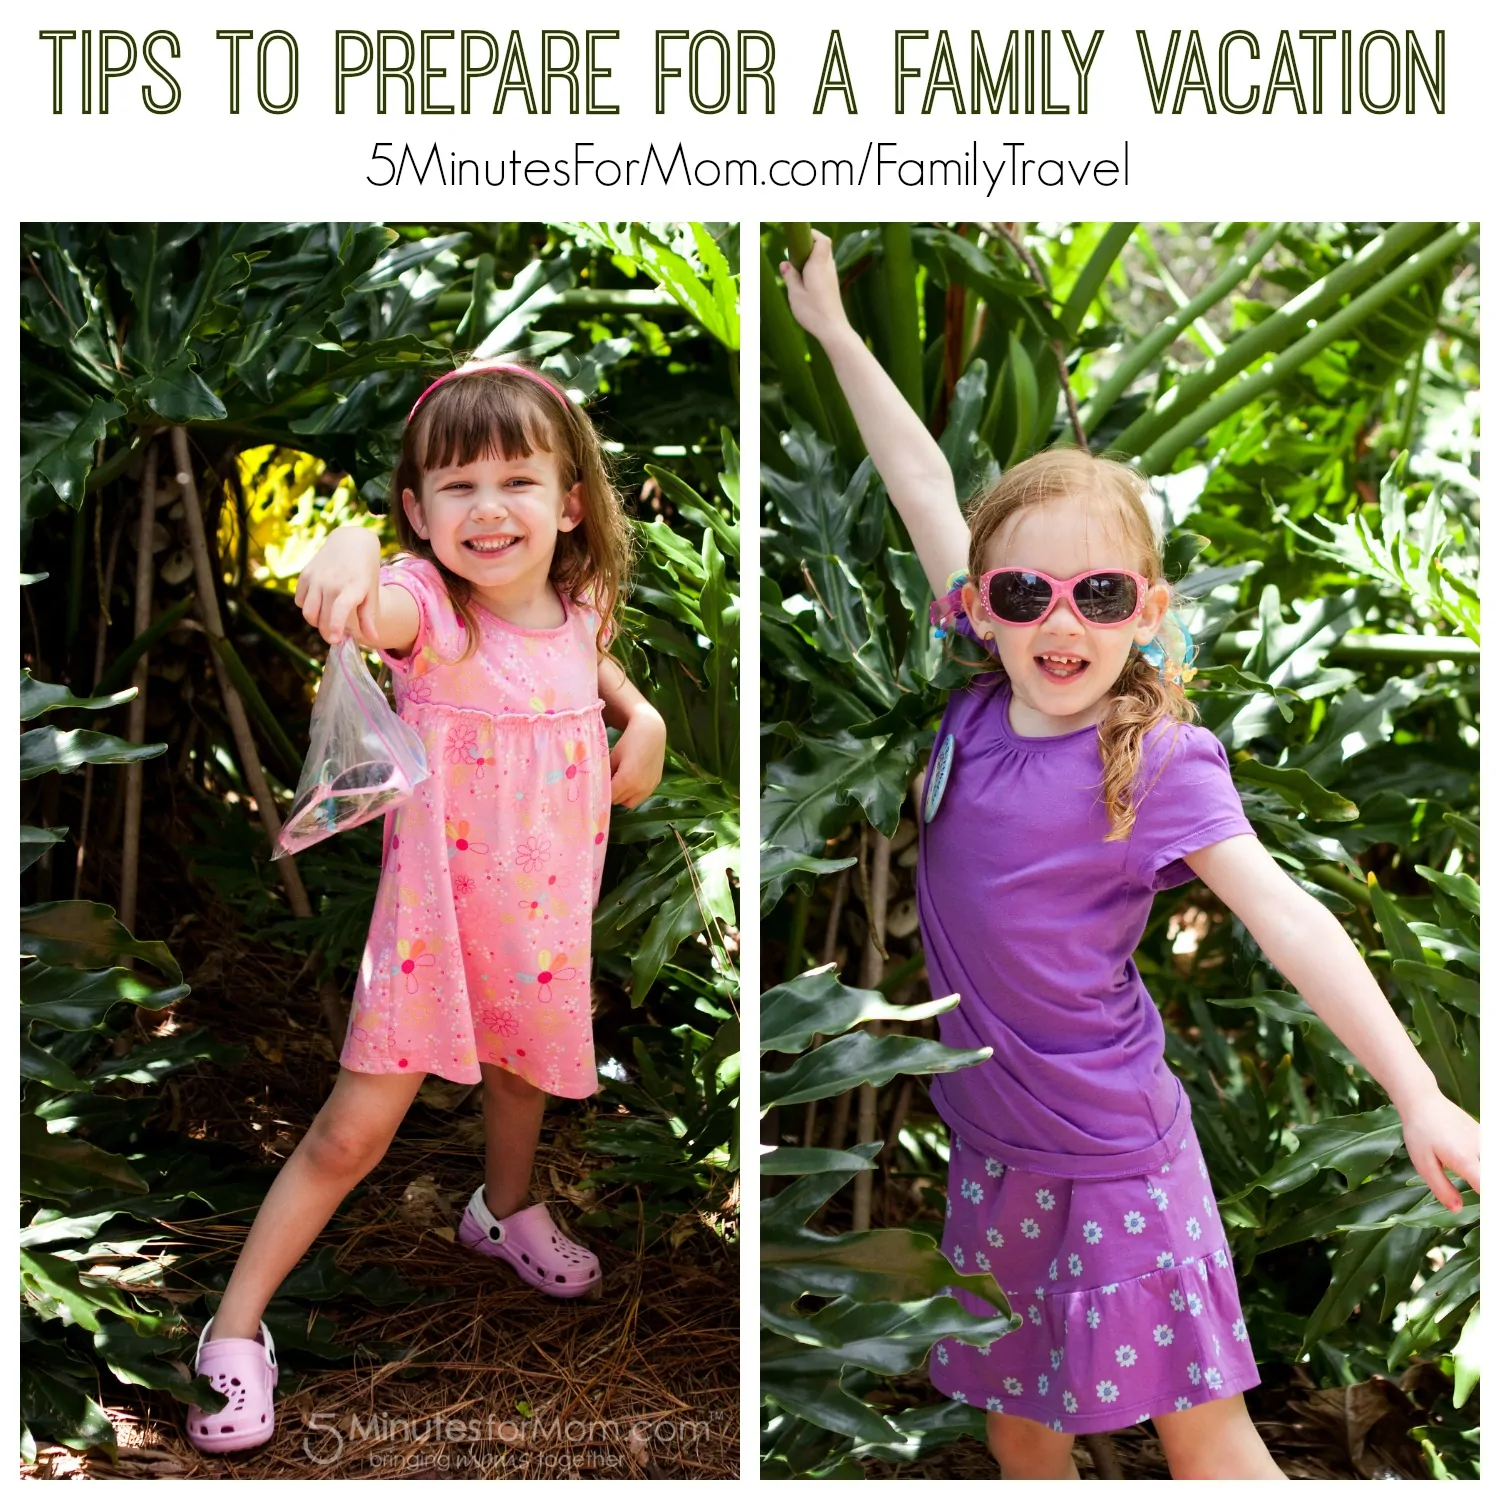 Tips to Prepare For a Family Vacation